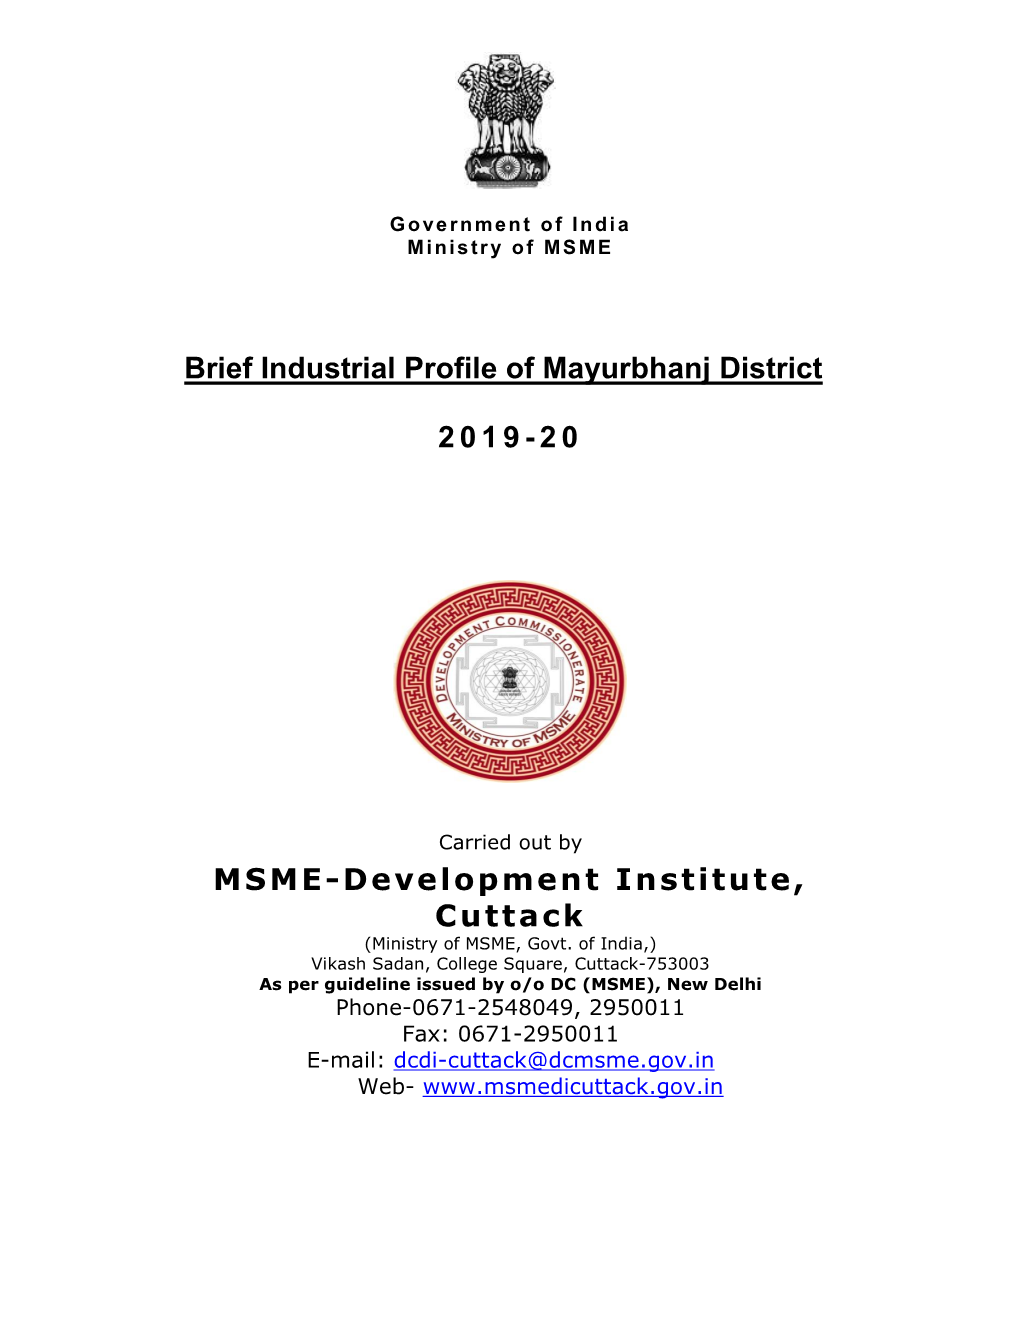 Brief Industrial Profile of Mayurbhanj District 2019-20